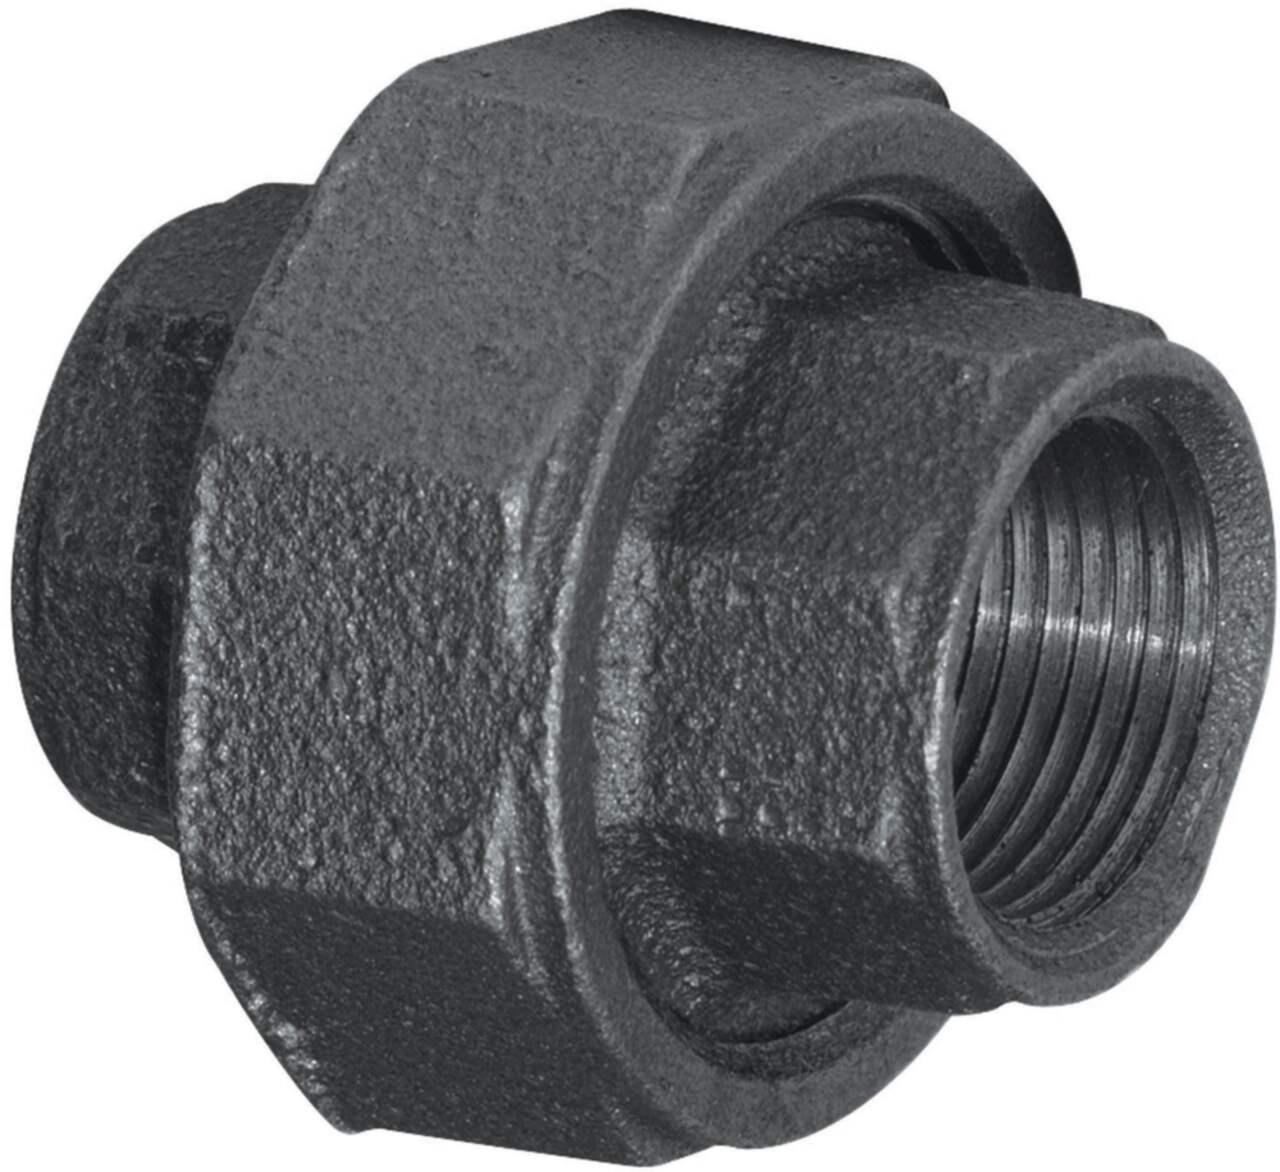 Union Elbow Tube Connector Fitting - Switch Suspension